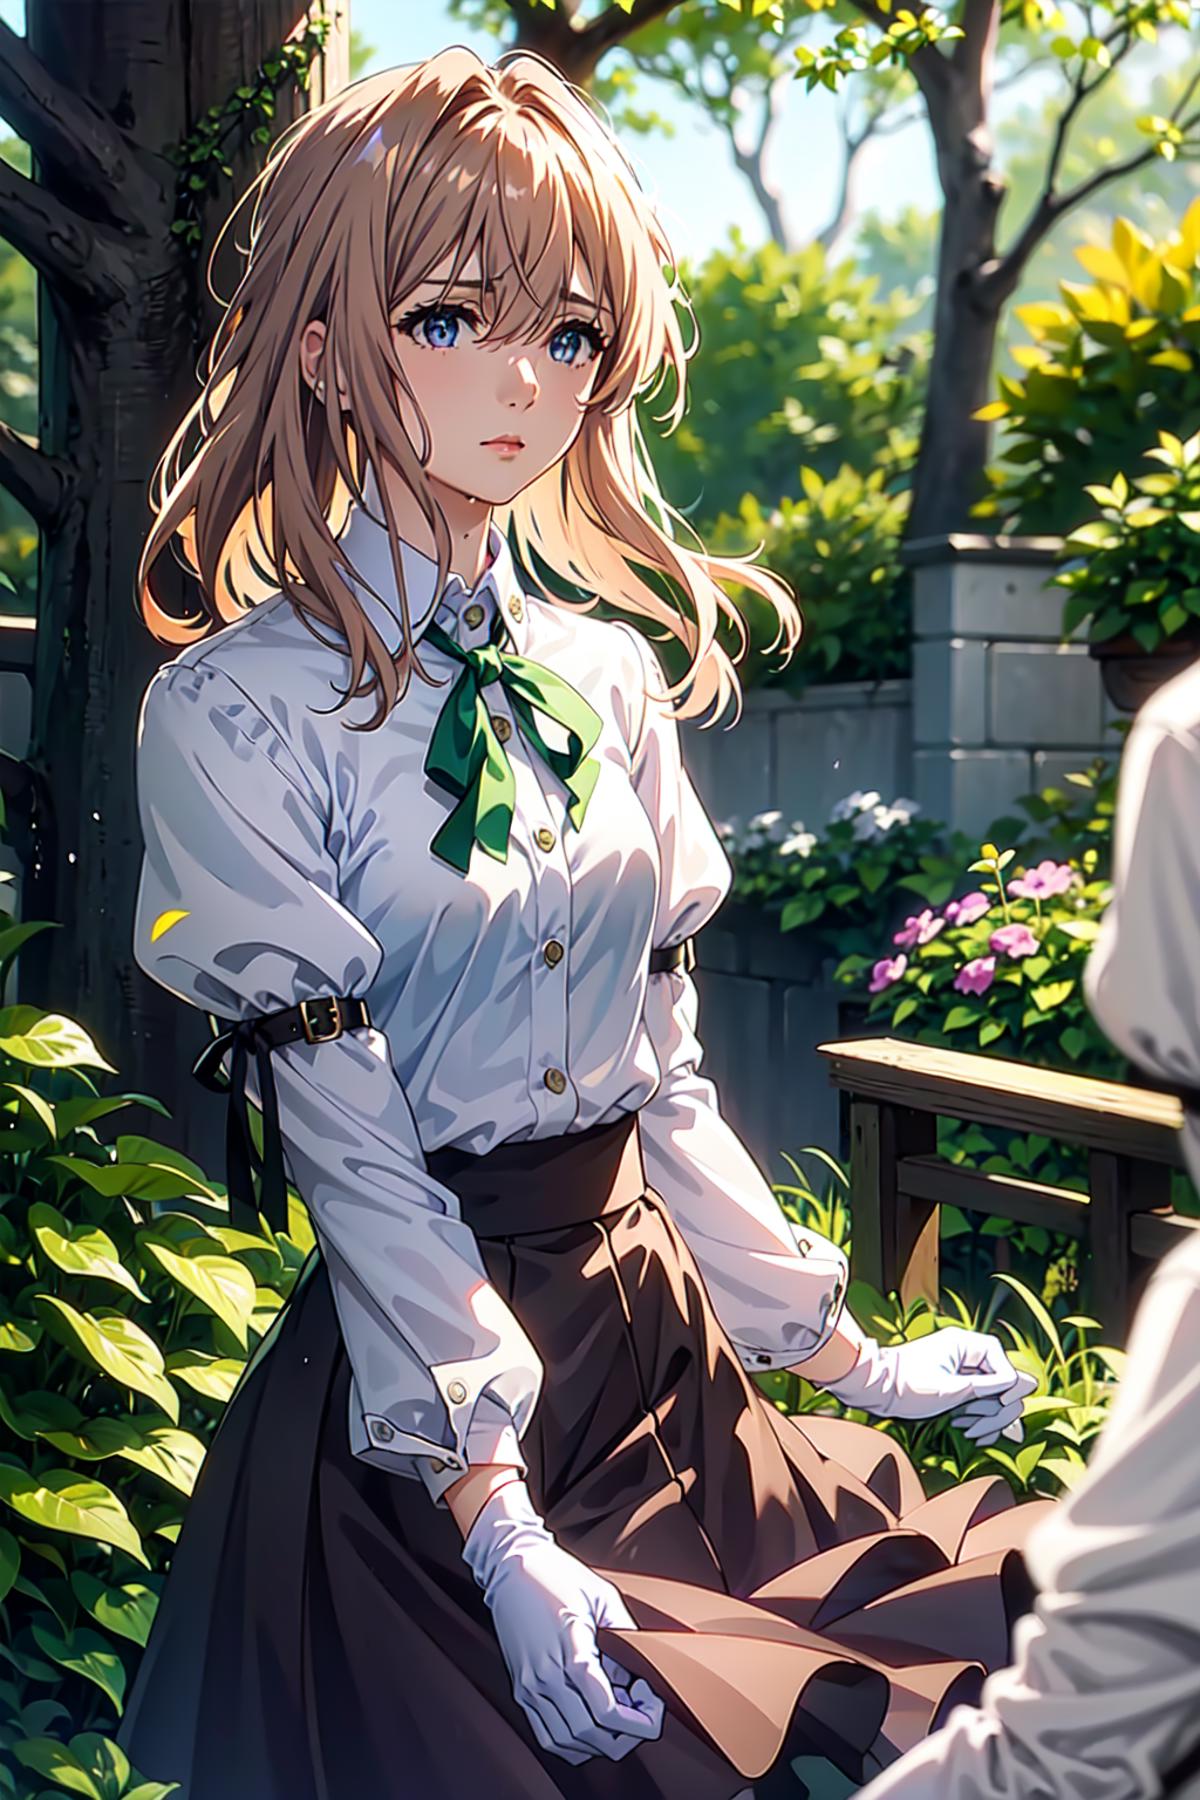 Violet Evergarden image by acke11man